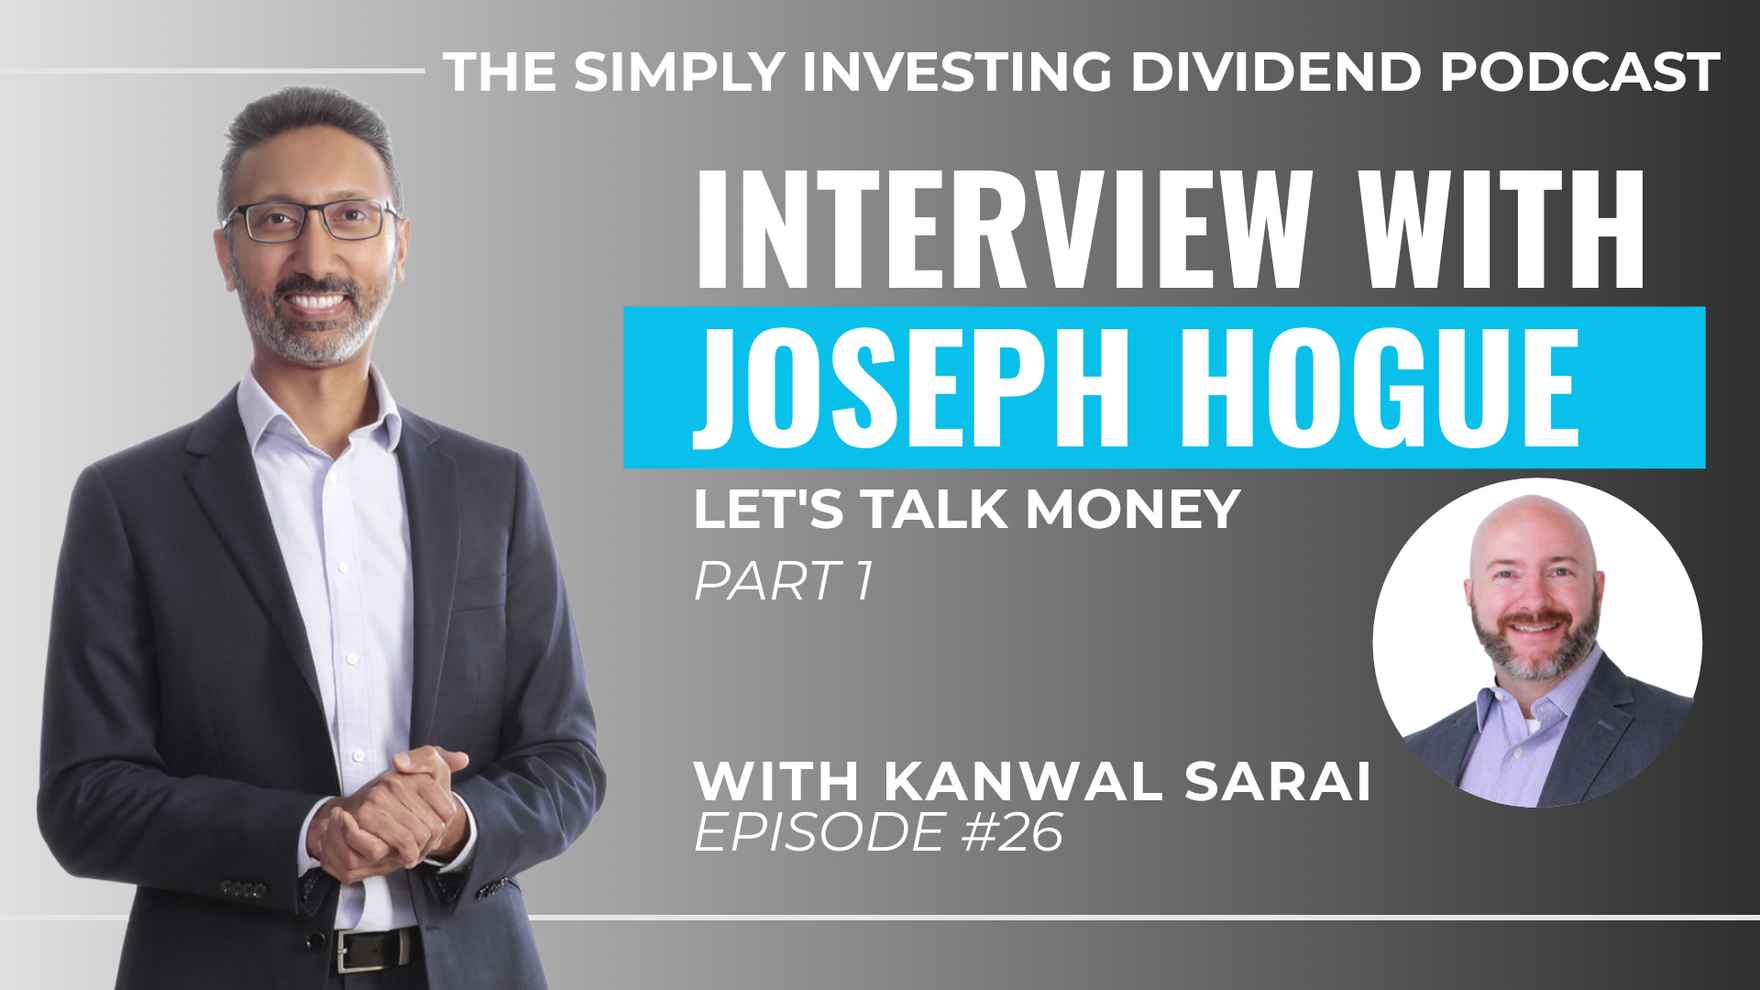 Simply Investing Dividend Podcast Episode 26 - Interview with Joseph Hogue of Let's Talk Money